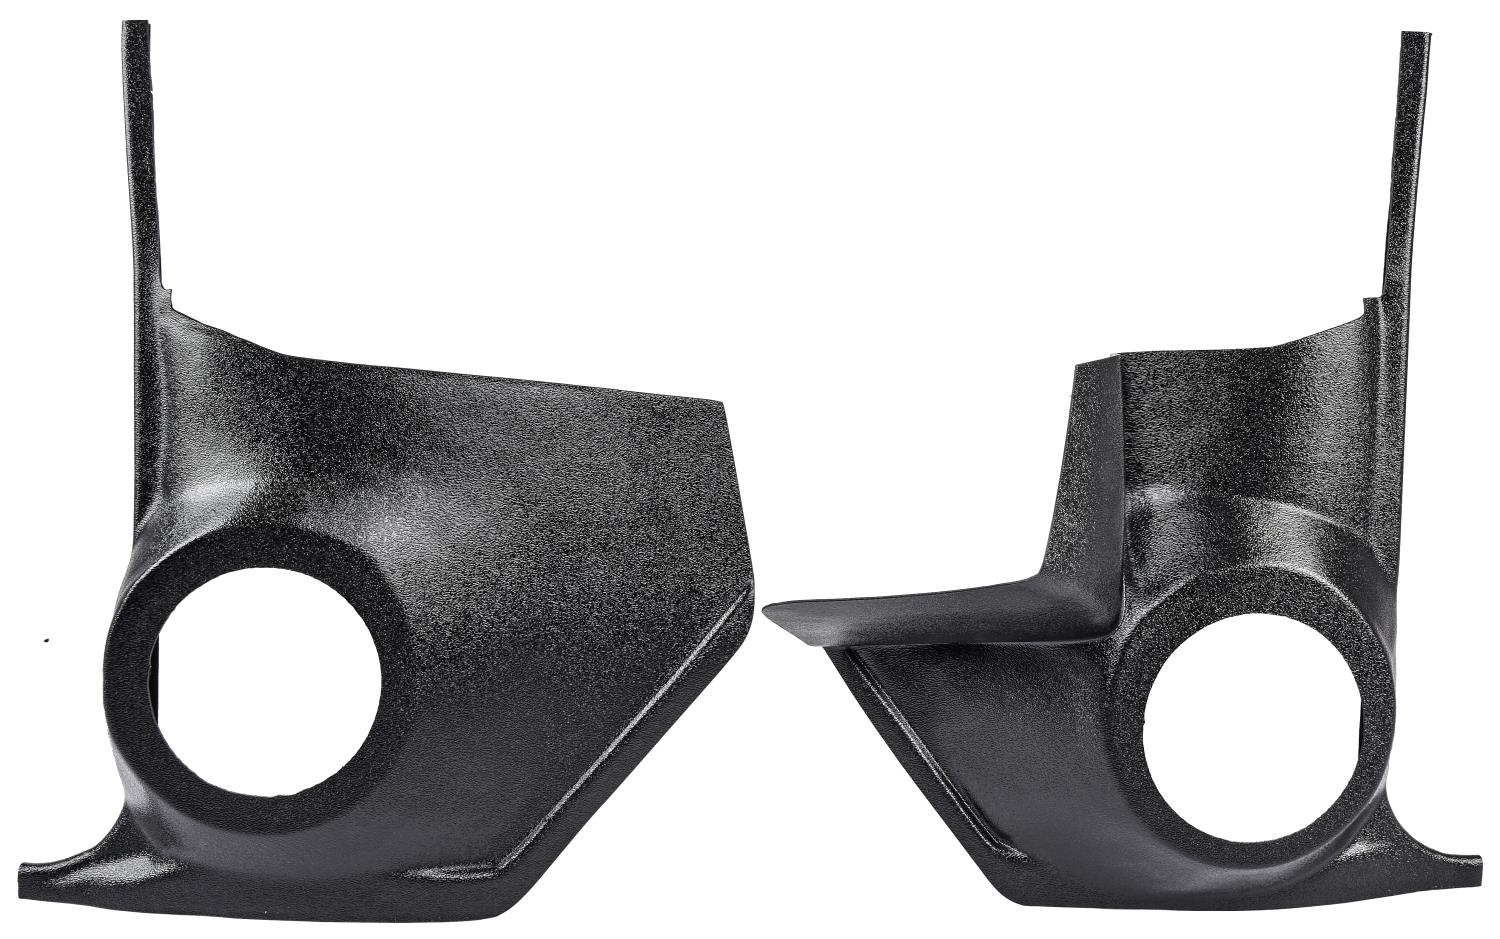 Interior Kick Panels for 1964-1967 Chevrolet, Buick, Oldsmobile, Pontiac Models With A/C [Cutouts for 6 1/2 in. Round Speakers]